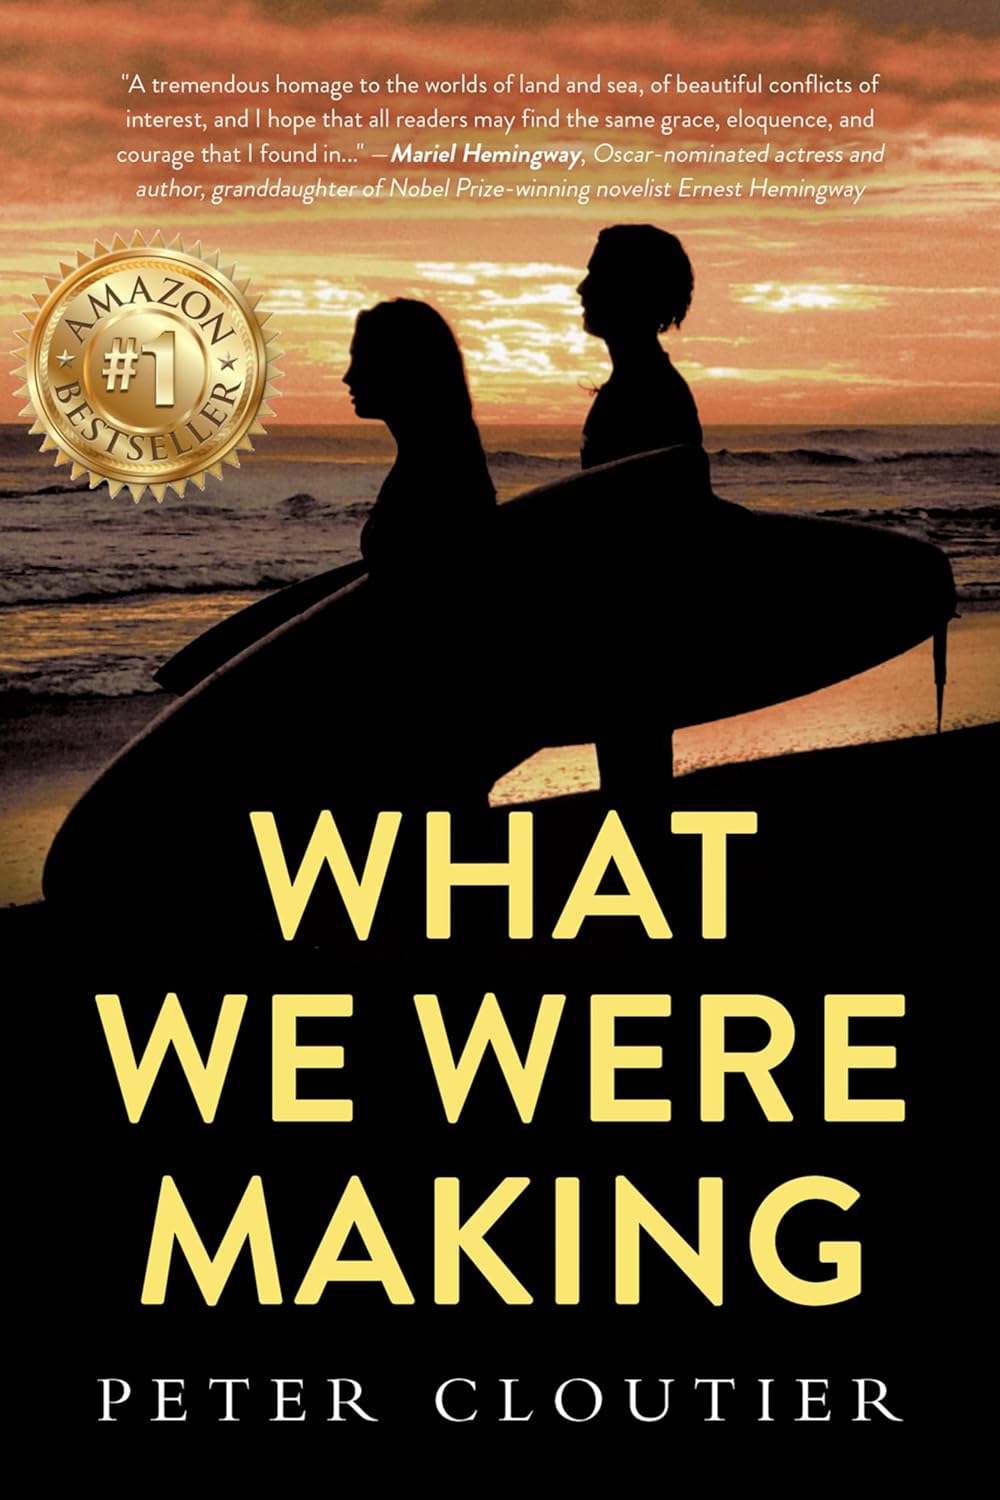 New novel "What We Were Making" by Peter Cloutier is released, an adrenaline-filled oceanic adventure of colliding worlds, political intrigue, and unabating love 